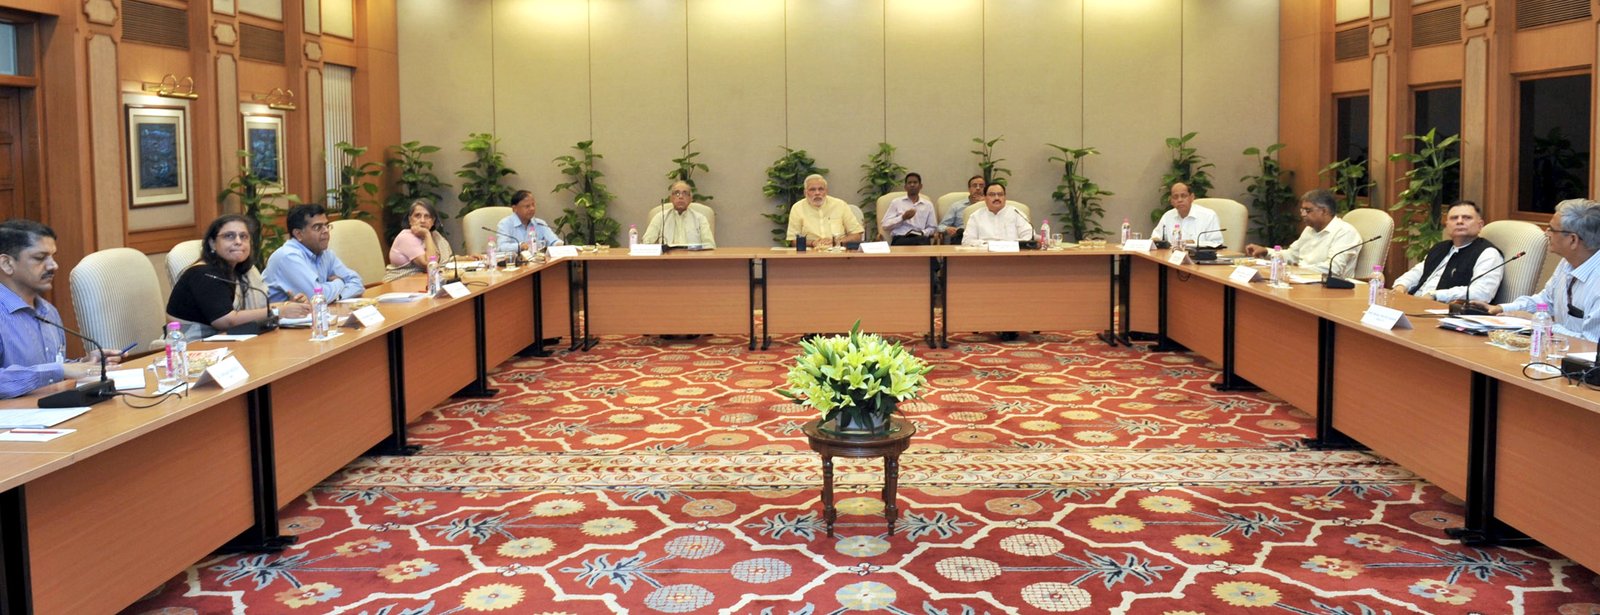 The Prime Minister, Mr Narendra Modi chairing the meeting on the progress of various healthcare initiatives of the Union Government, in New Delhi on June 09, 2015. The Union Minister for Health and Family Welfare, Mr J P Nadda and other dignitaries are al